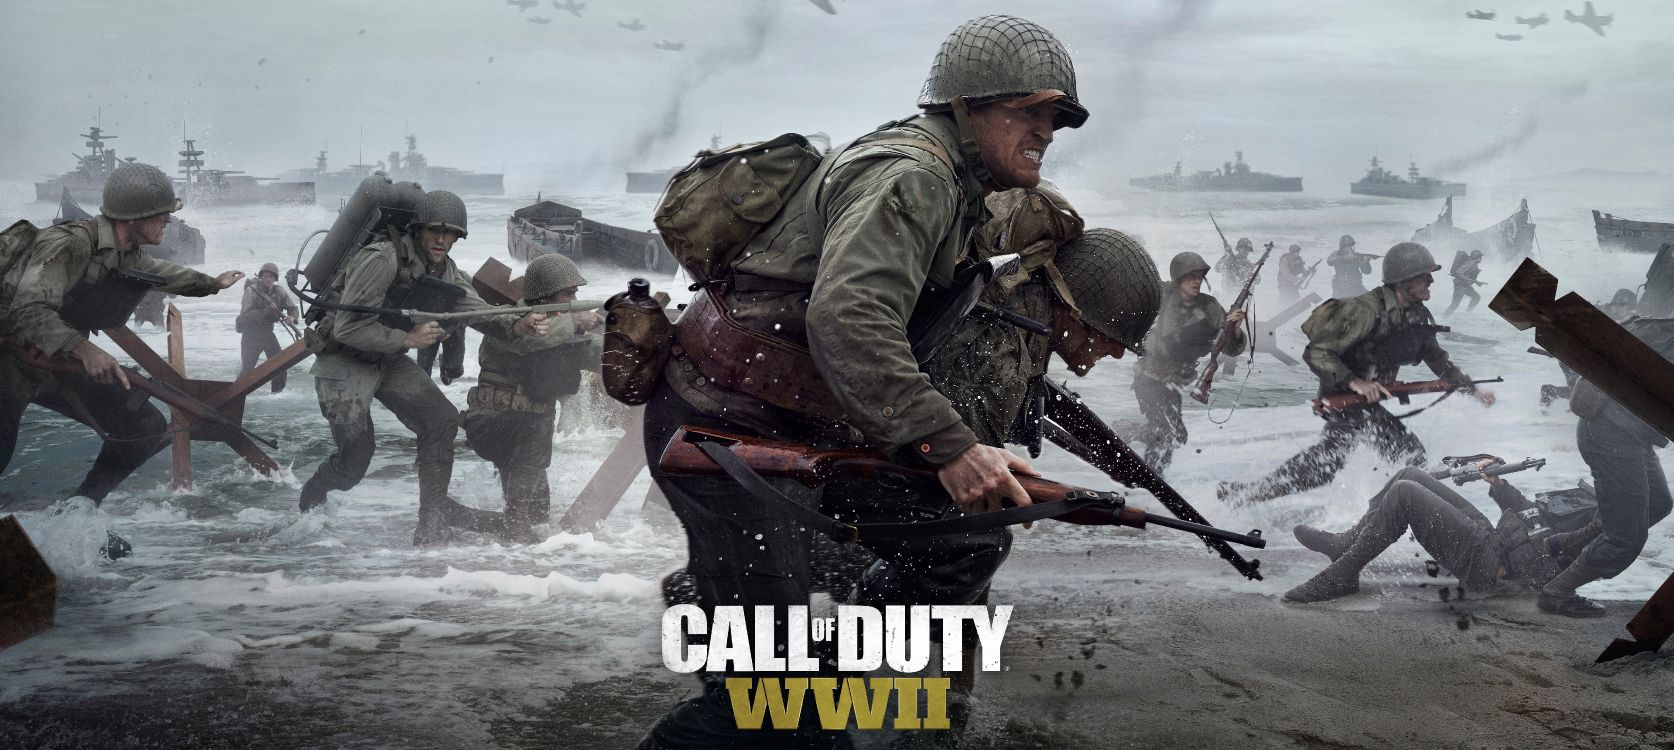 Call of Duty Ww2, Call of Duty WWII, Call of Duty, Call of Duty World at War, Activision. Wallpaper in 7190x3220 Resolution